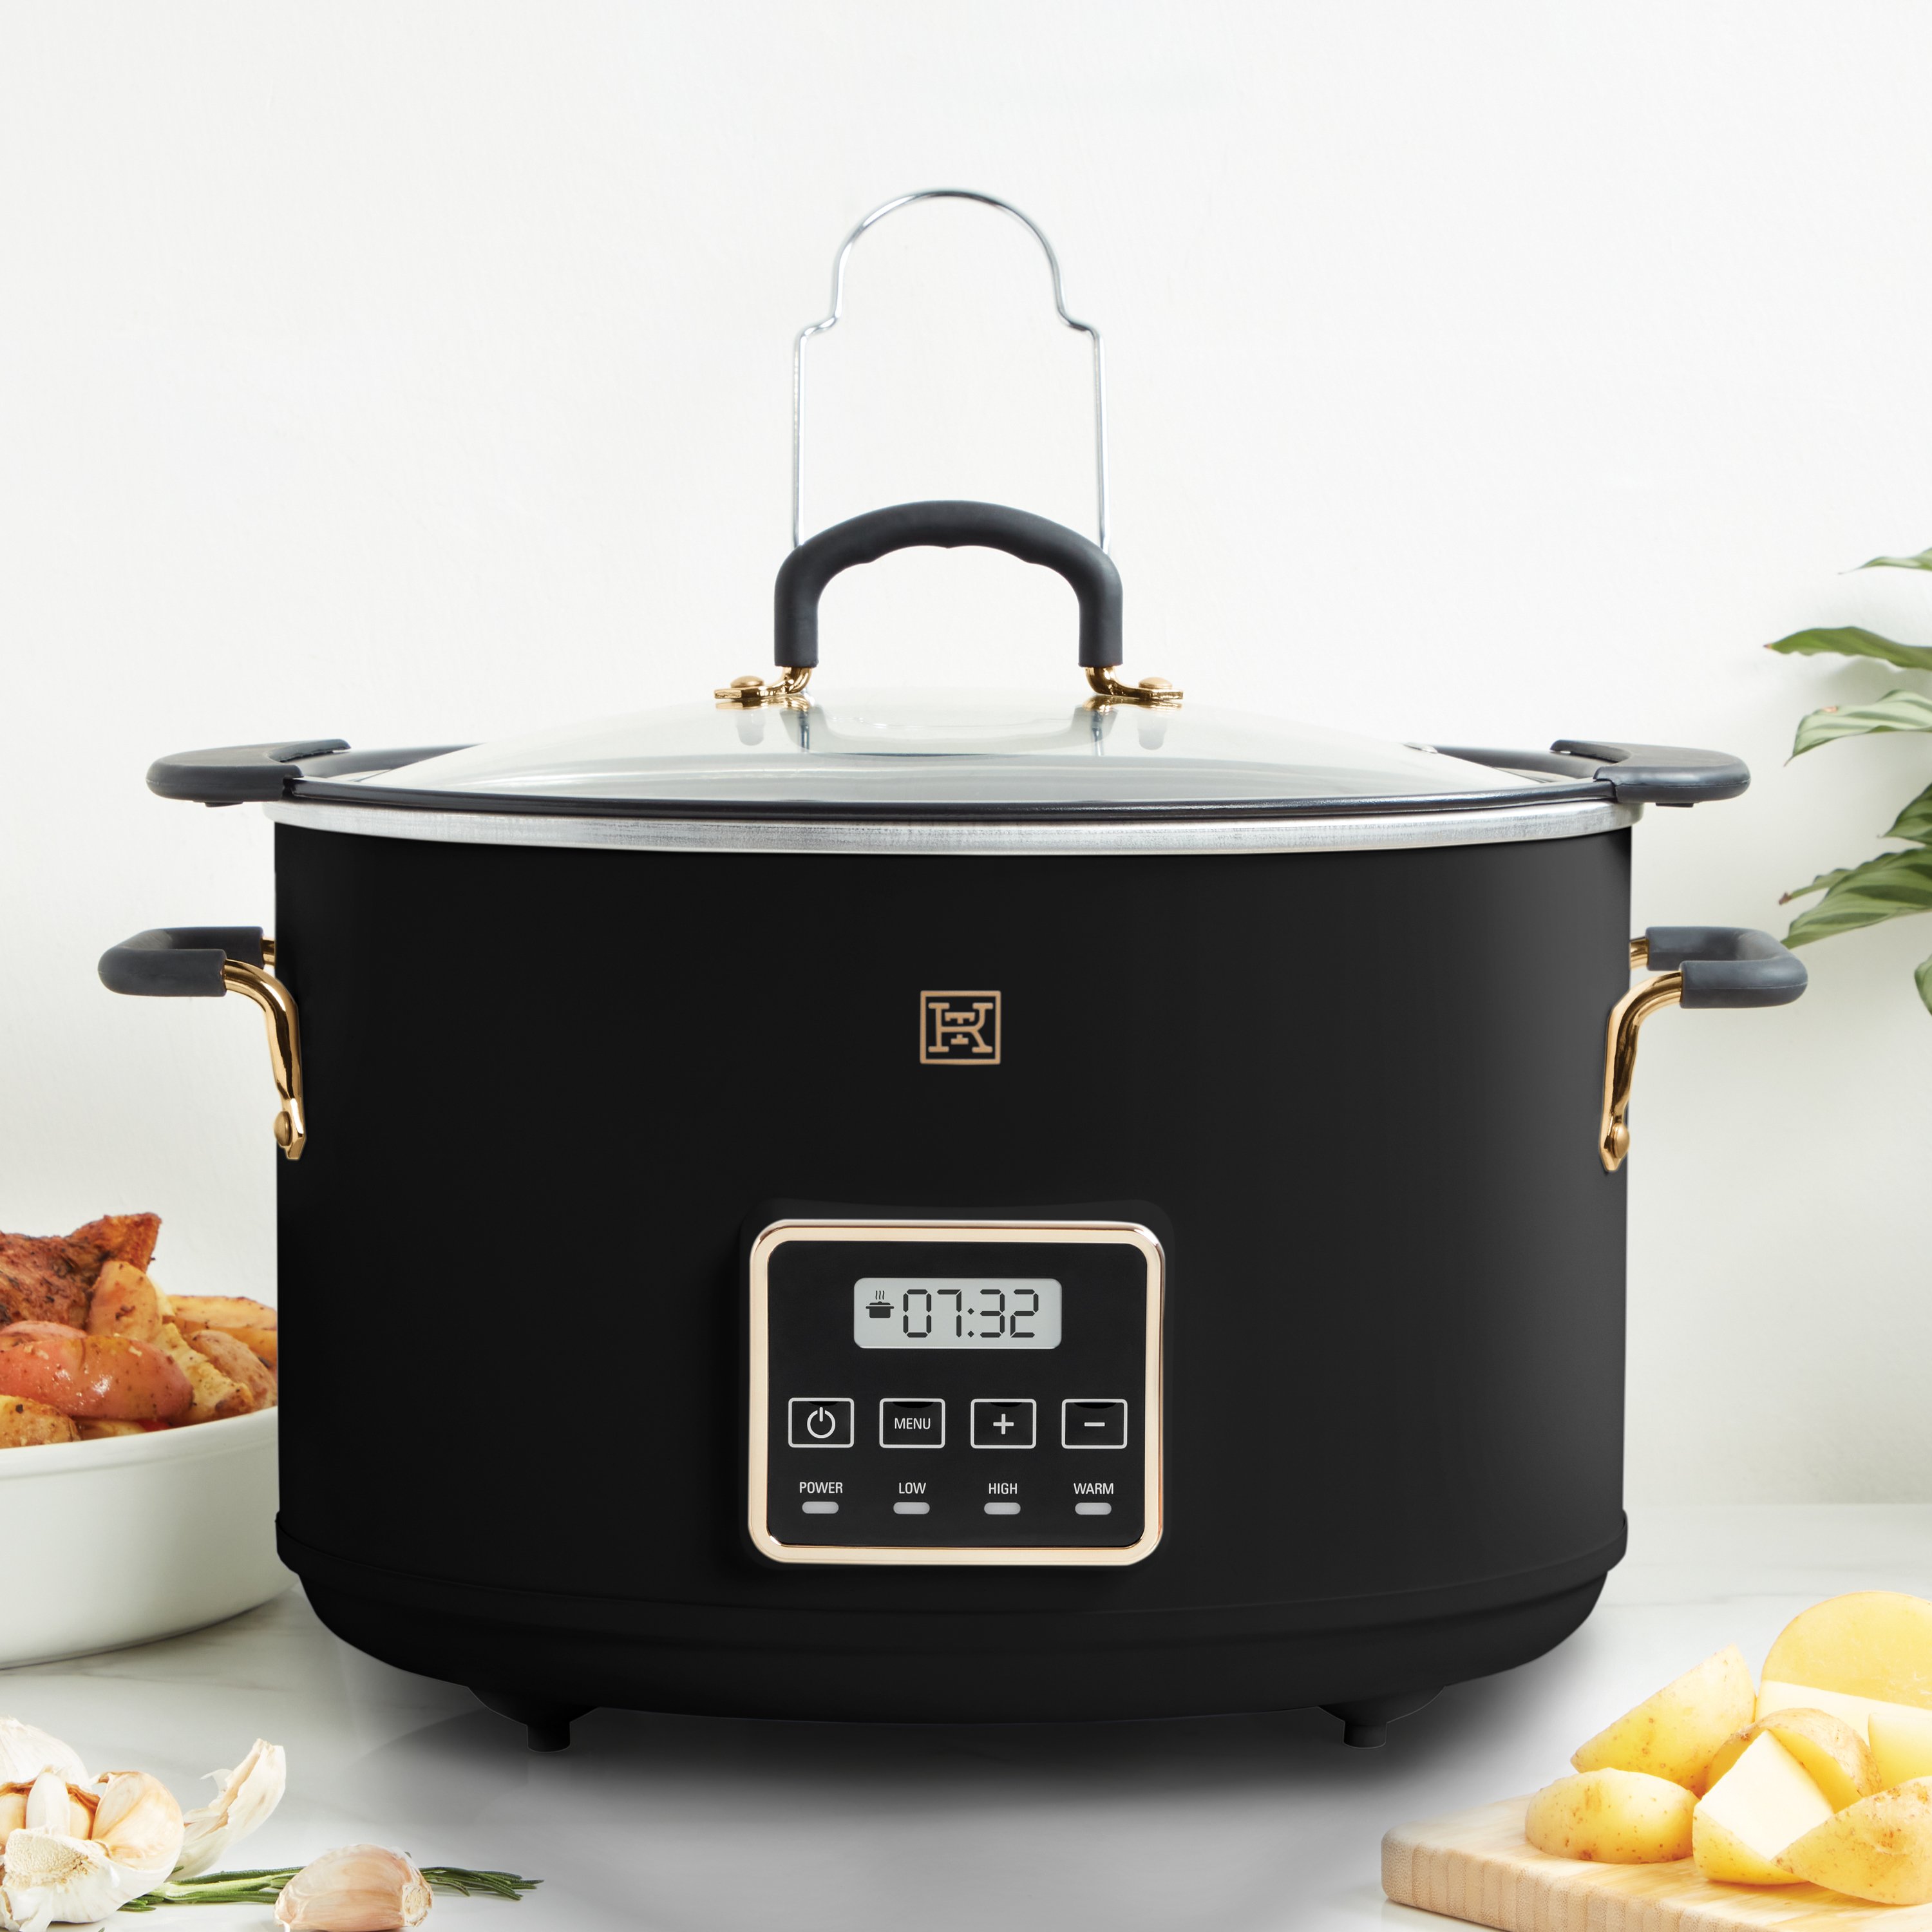 Chefstyle 4 Quart Programmable Red Slow Cooker - Shop Cookers & Roasters at  H-E-B